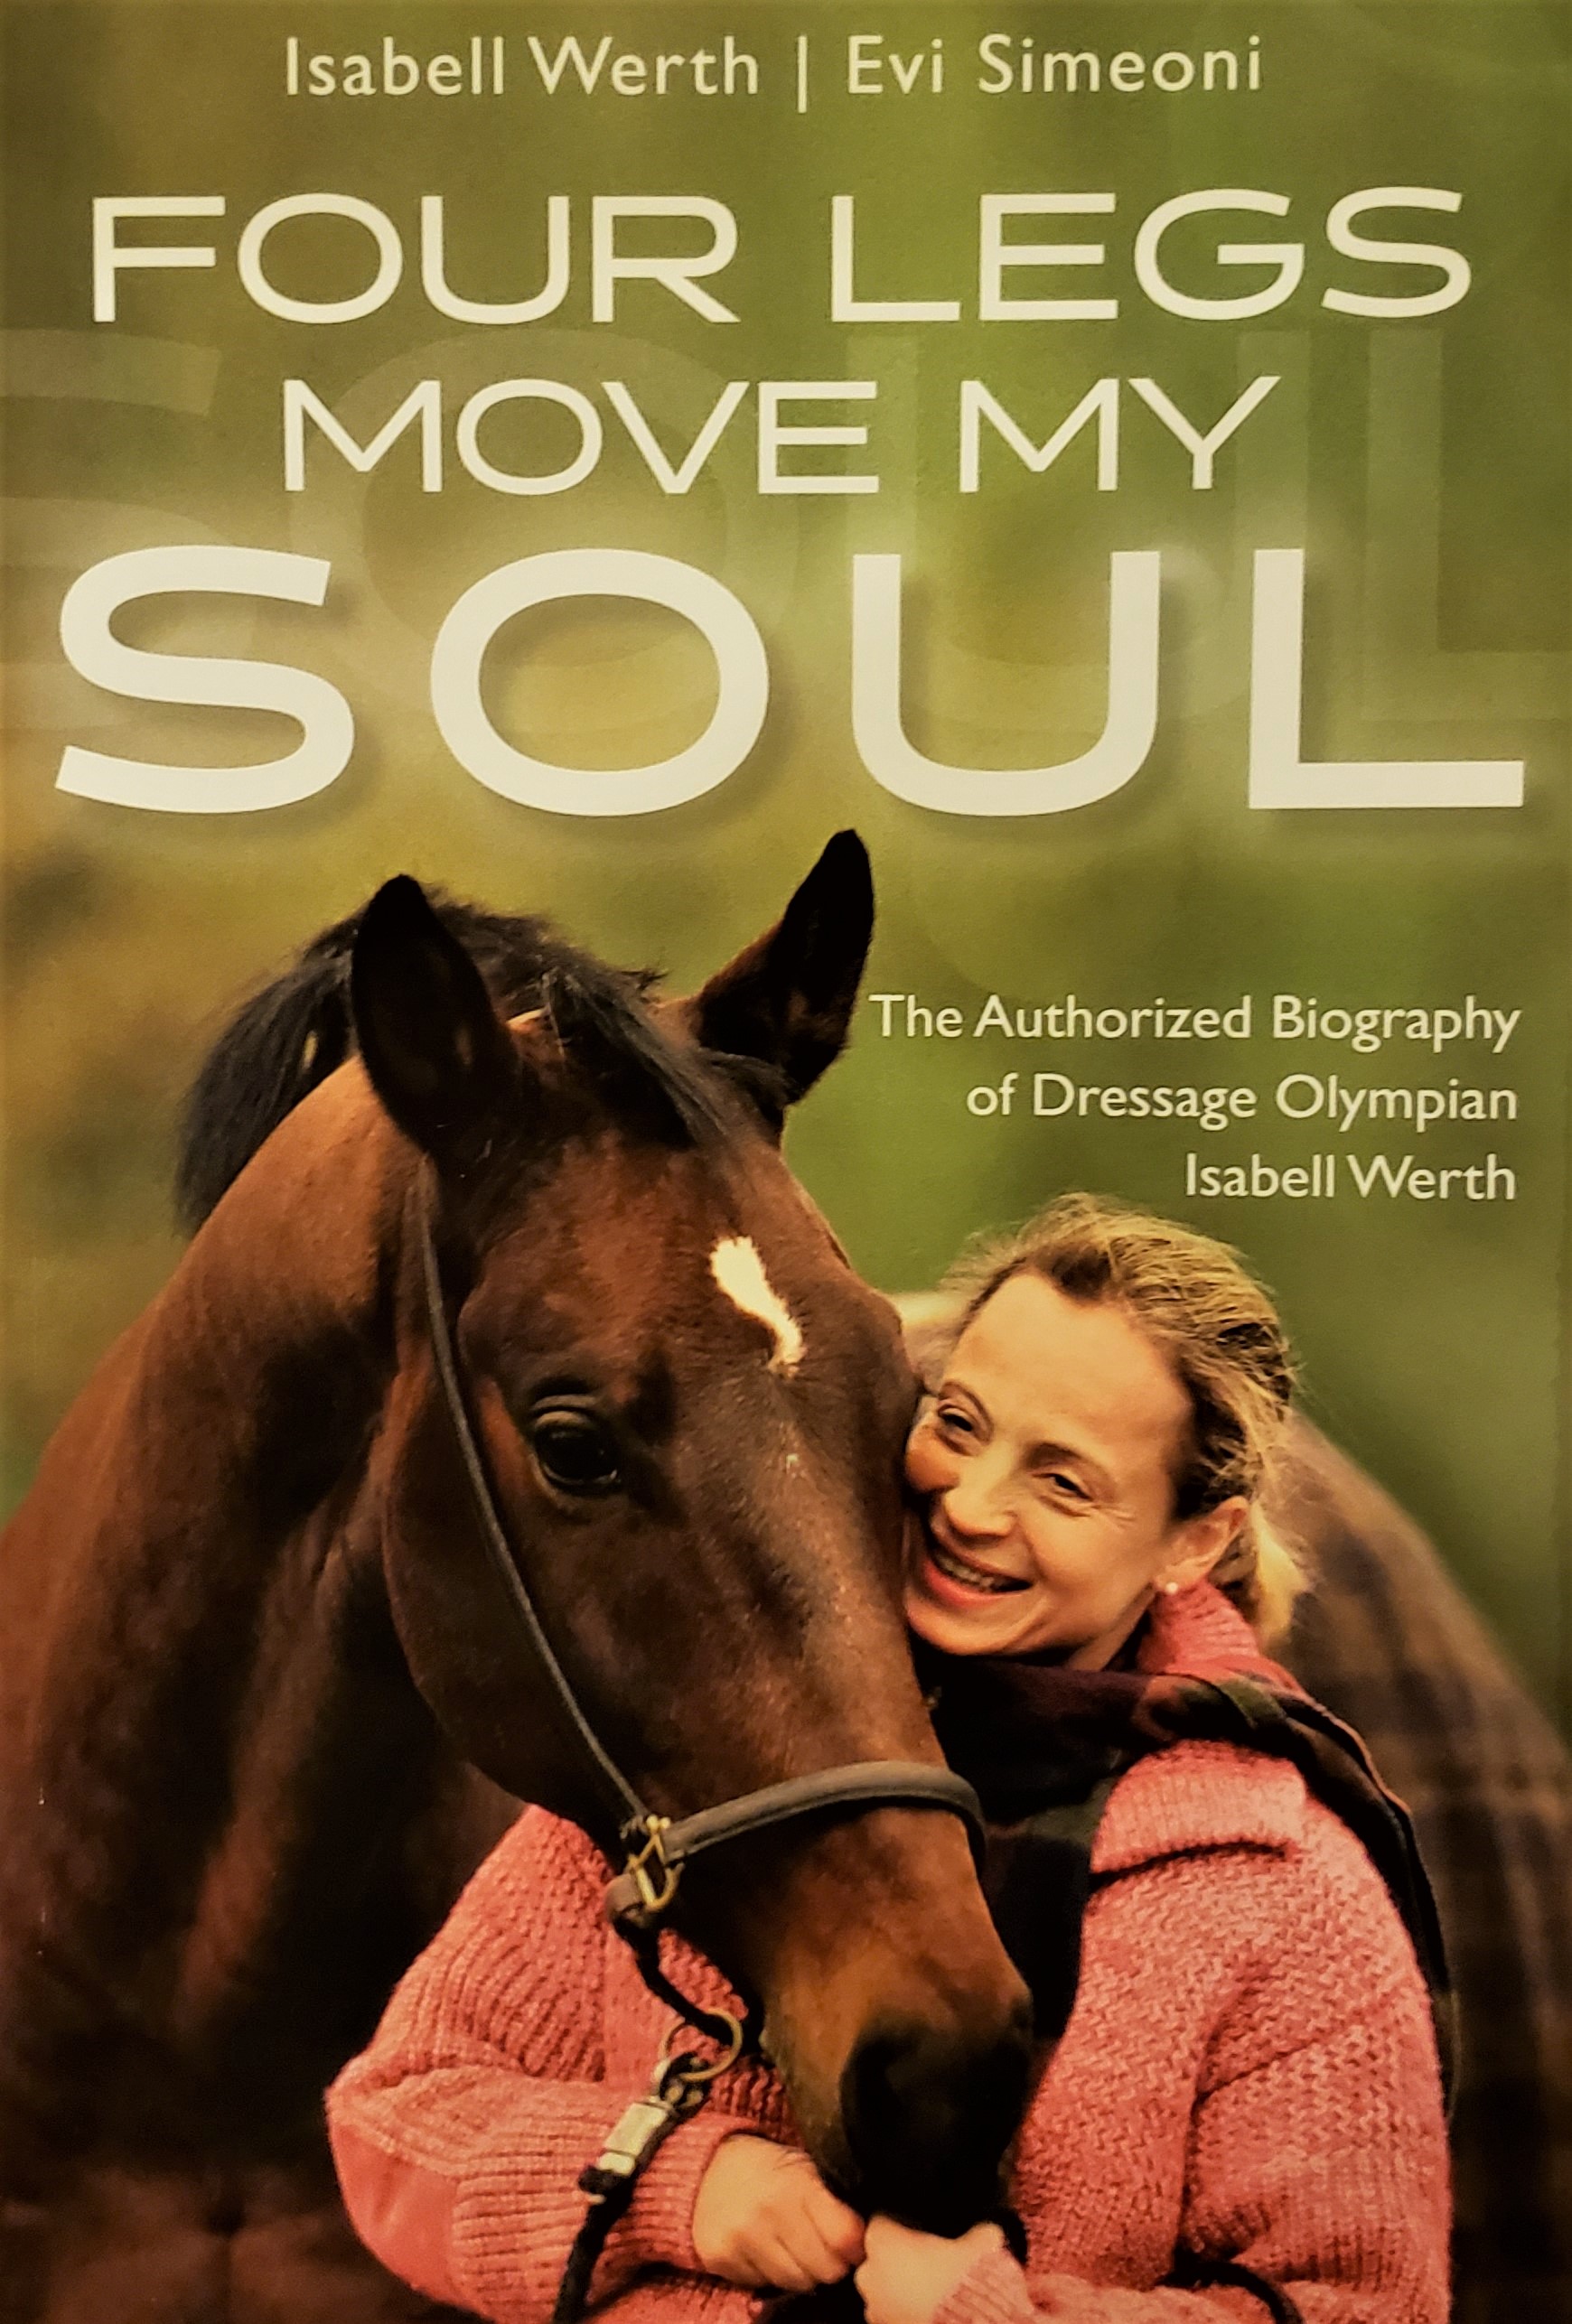 Book Review: Four legs move my soul. By Isabell Werth and Evi Simeoni